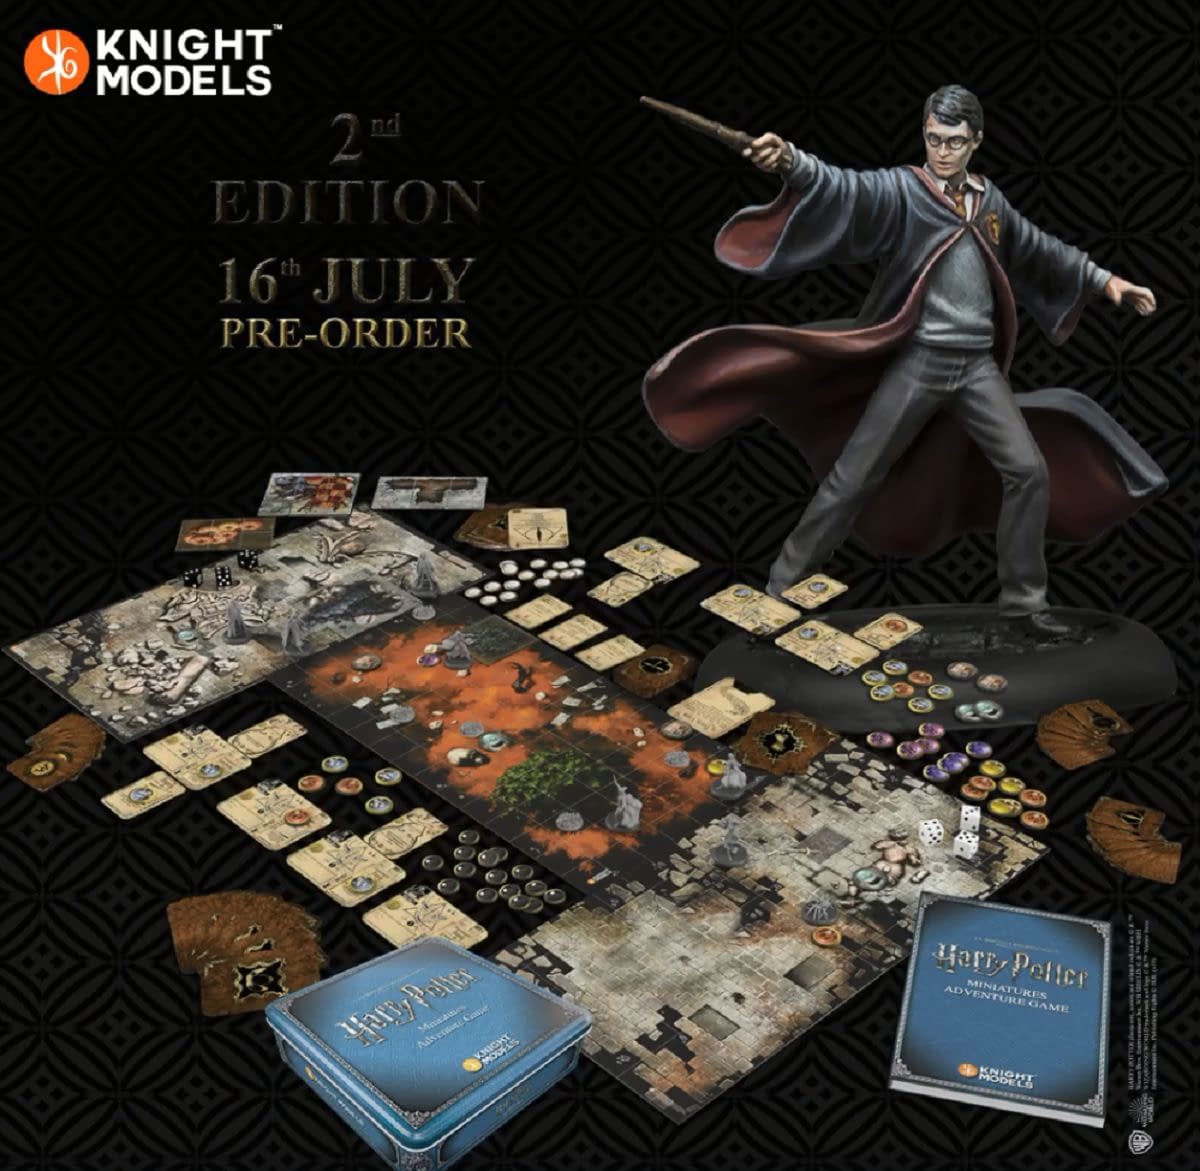 Knight Models Announces 2nd Edition of "Harry Potter" Miniatures Game